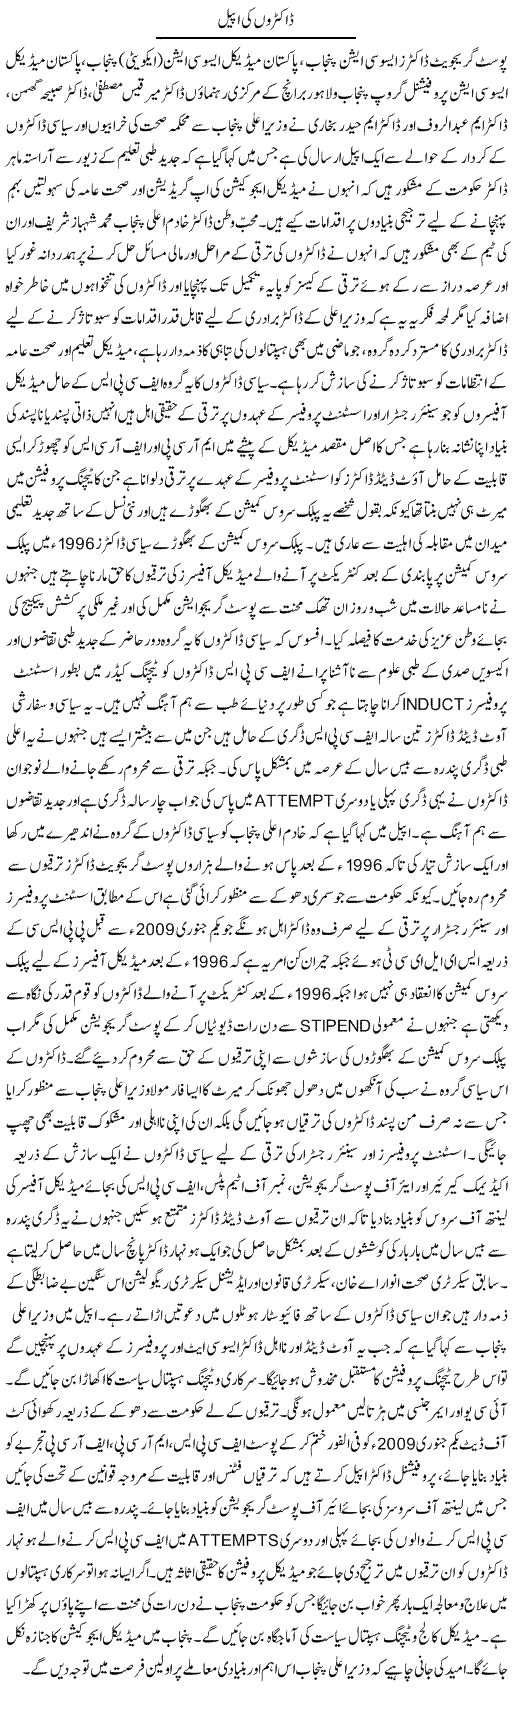 Appeal of Doctors Express Column Yousaf Abbasi 3 July 2011